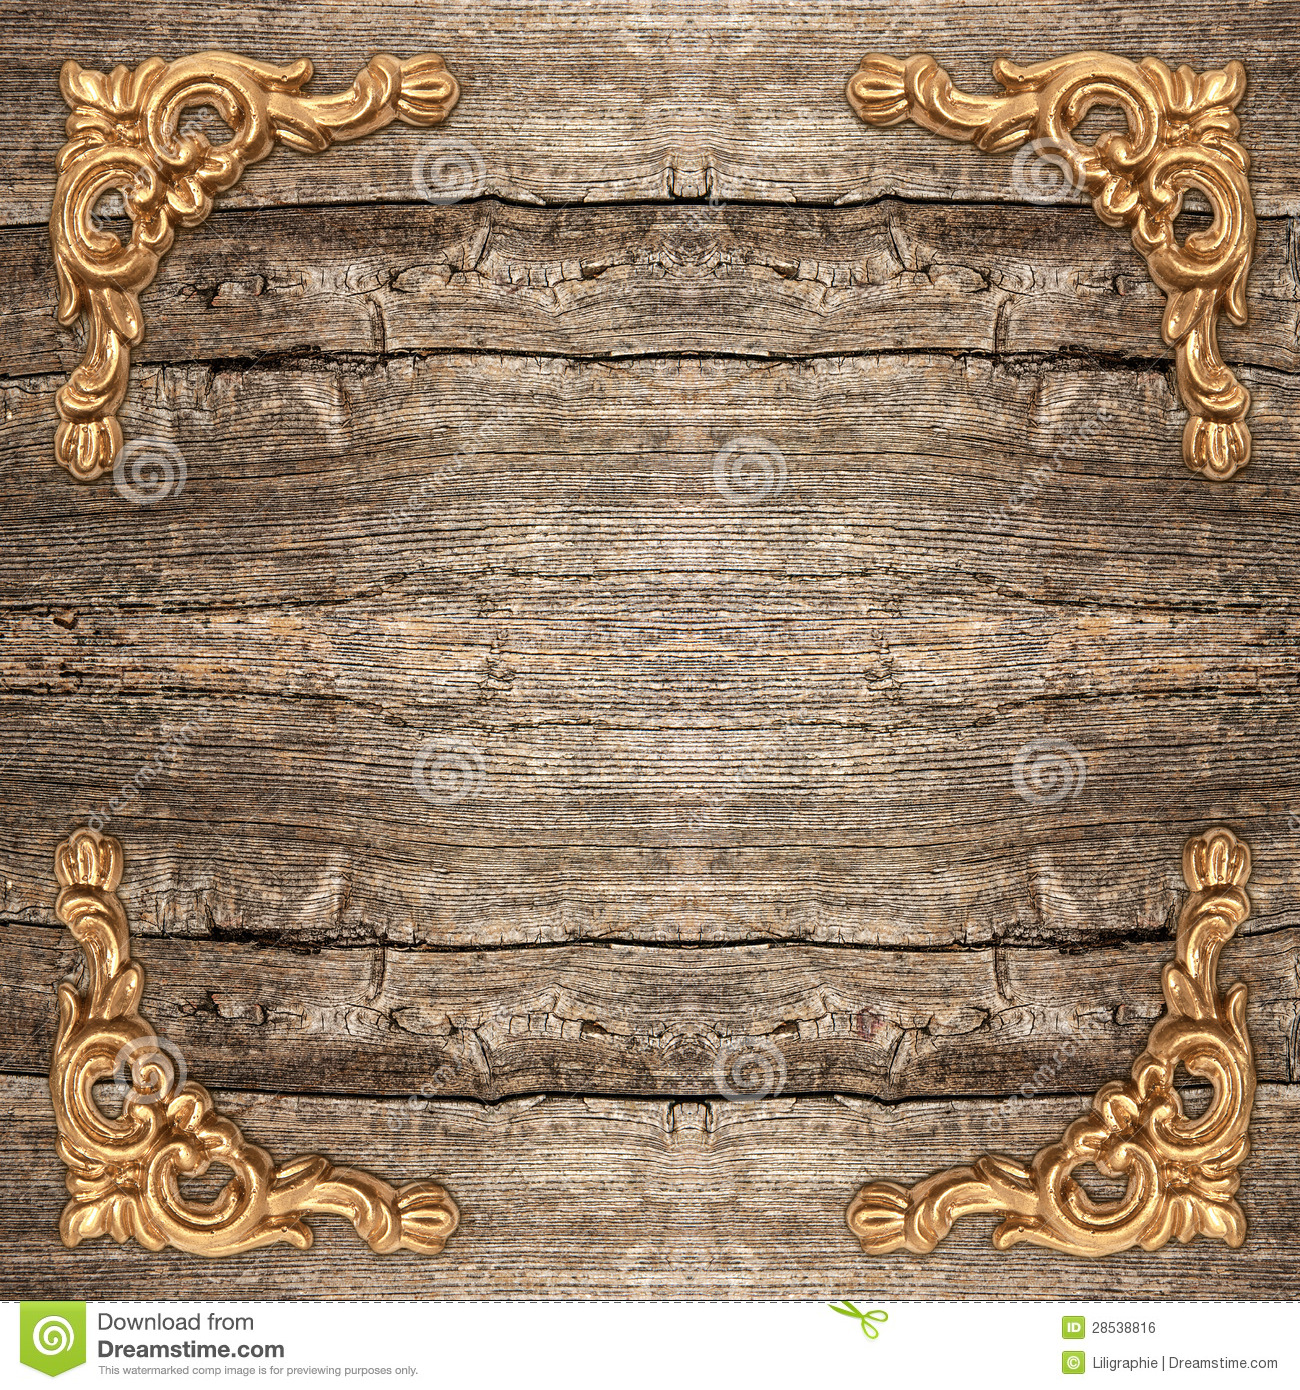 Rustic Wood Background Rustic Wooden Background With